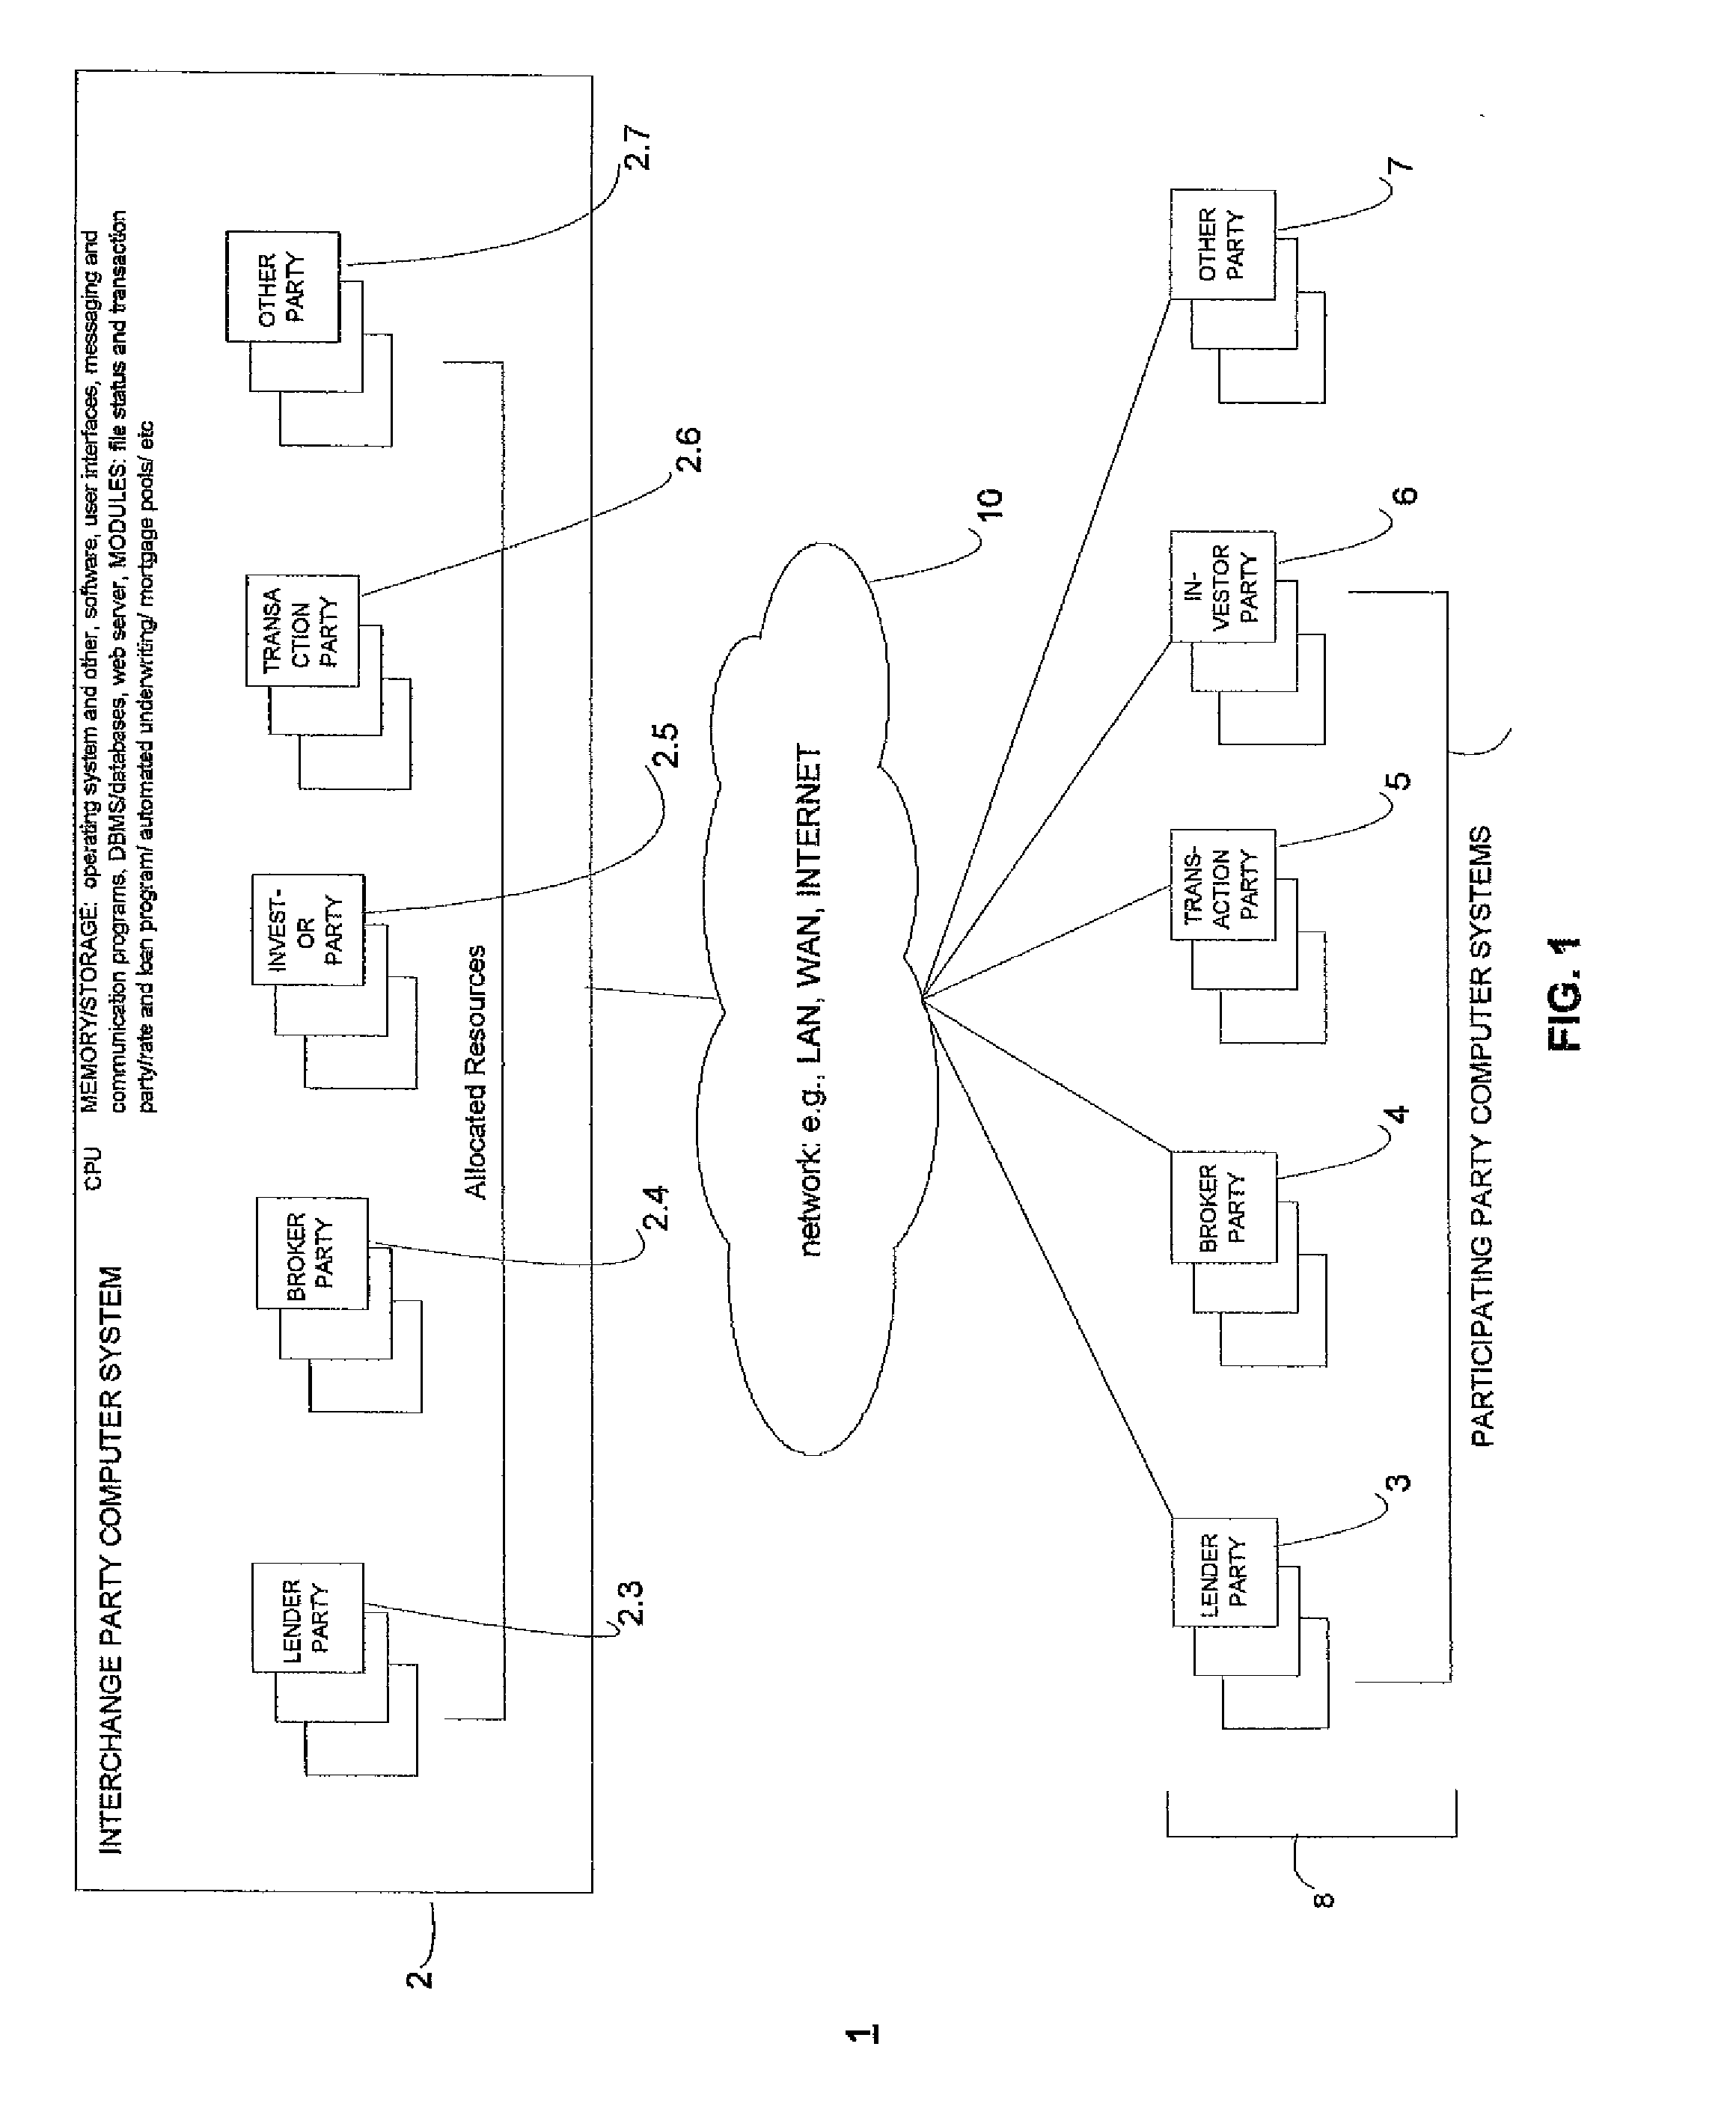 Computer system and method for networked interchange of data and information for members of the real estate financial and related transactional services industry